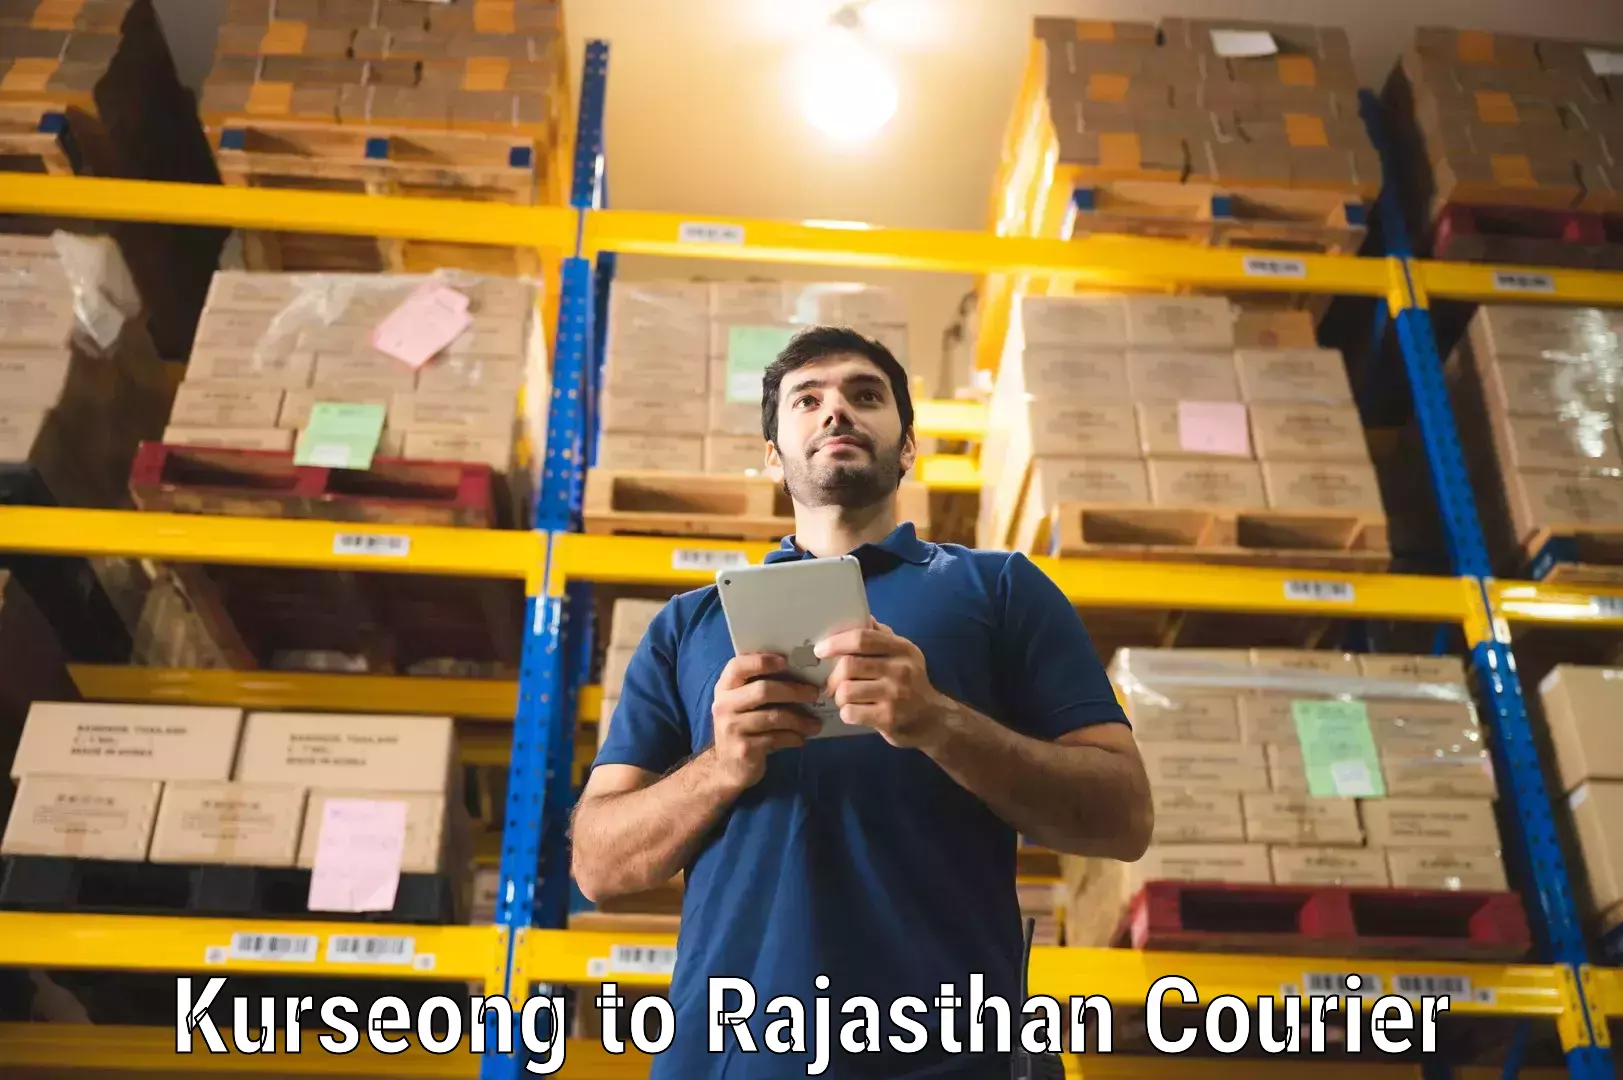 Courier service comparison Kurseong to Rajasthan